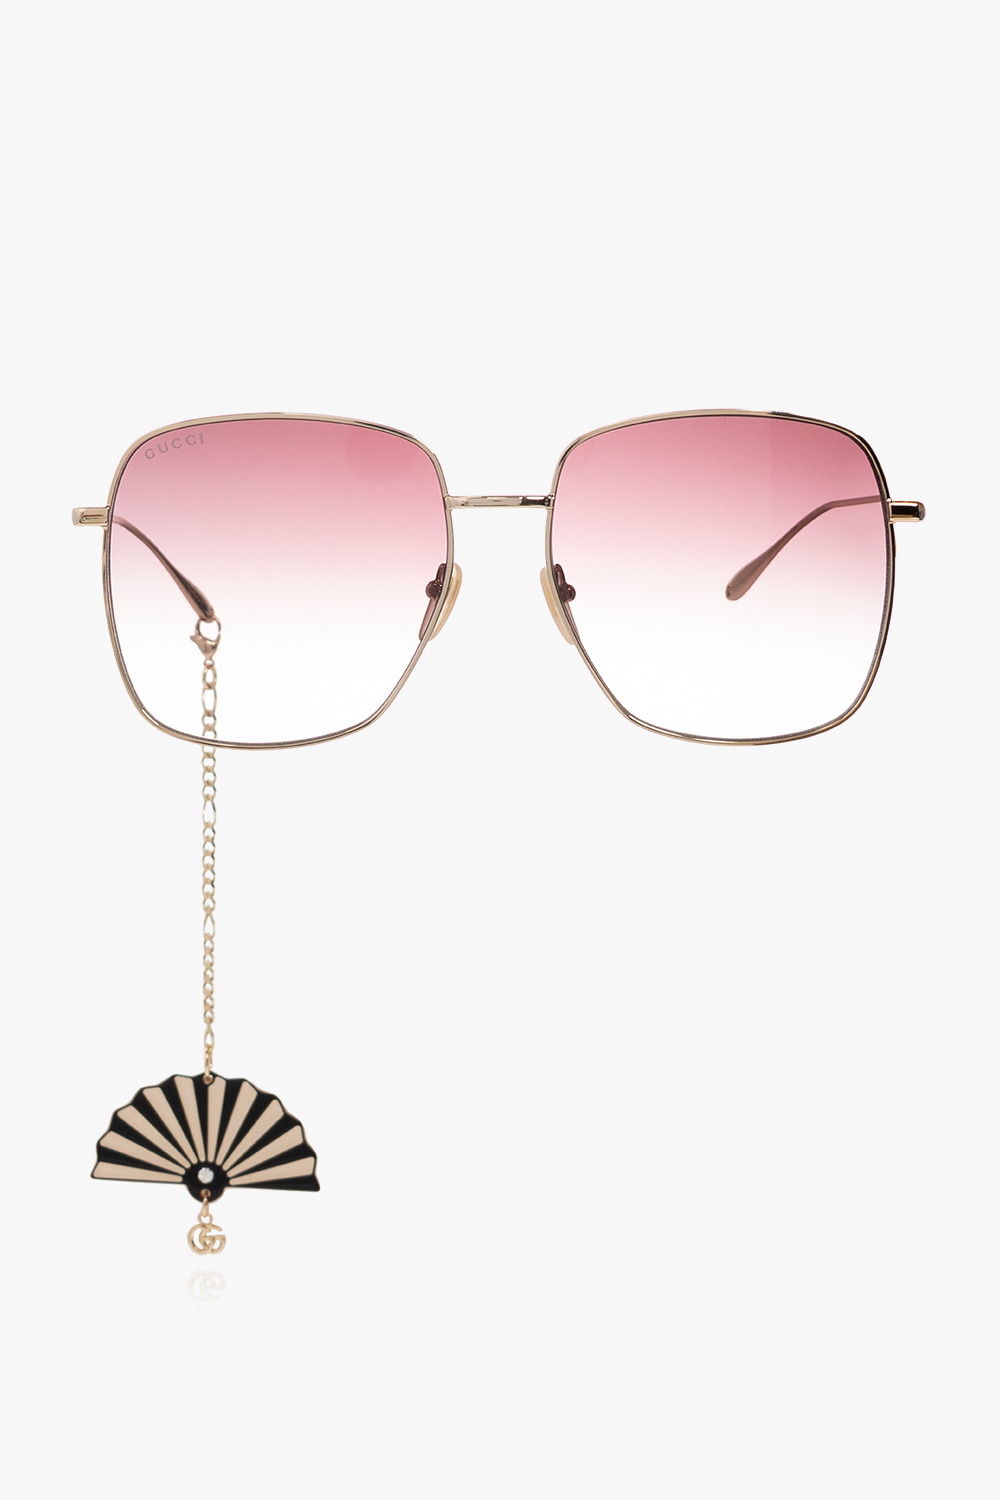 Gucci Sunglasses with fan charms